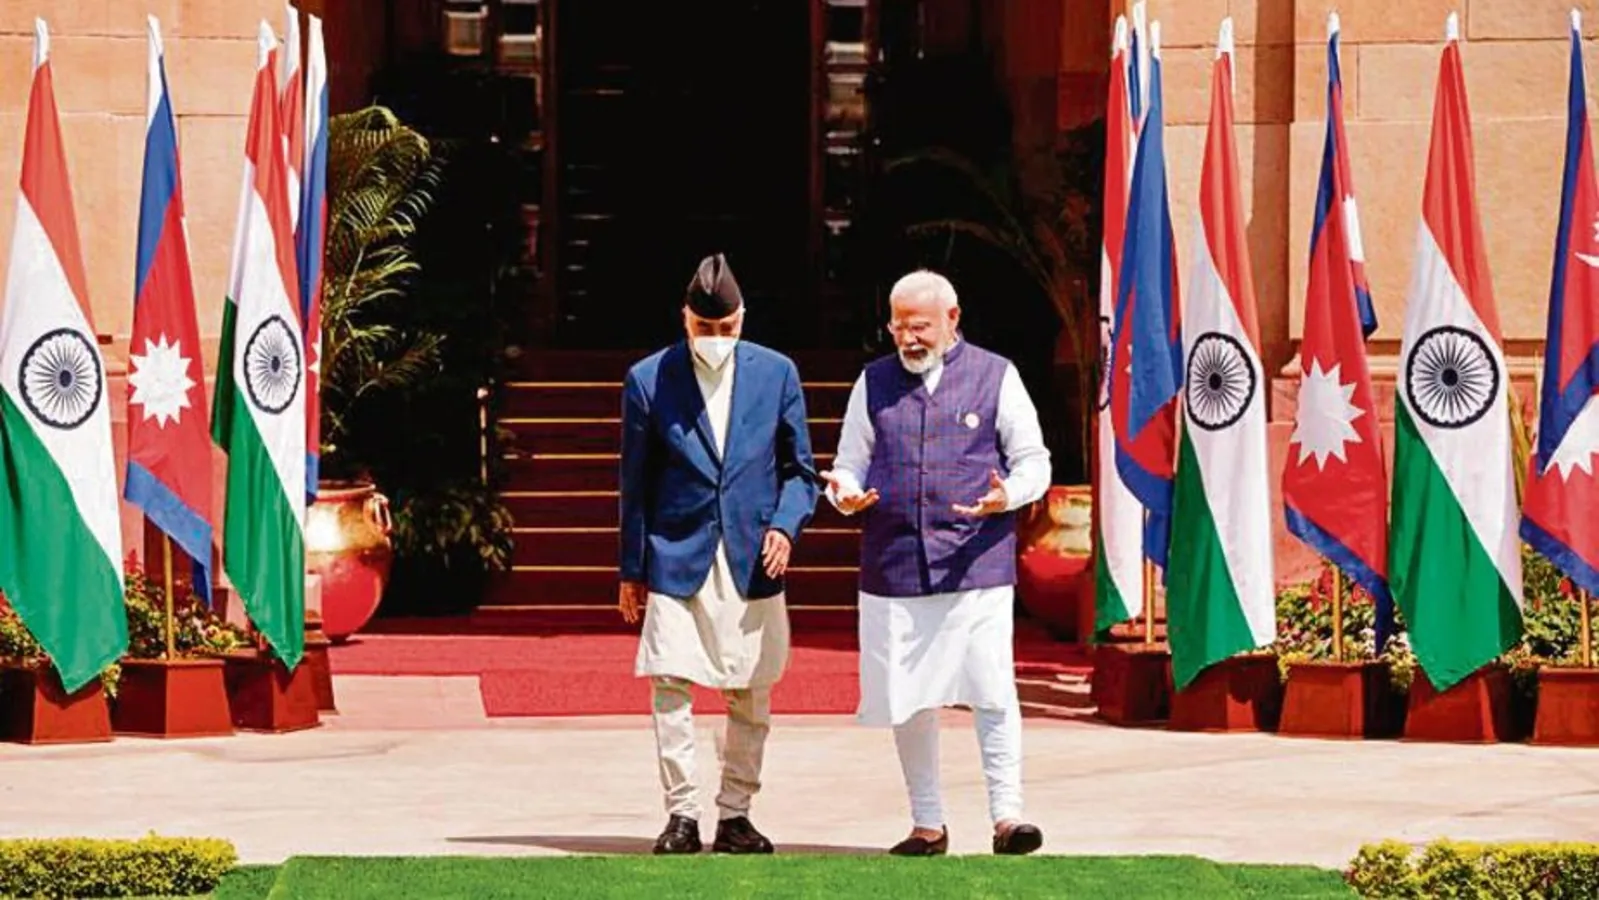 Modi heads to Nepal today with focus on boosting ties